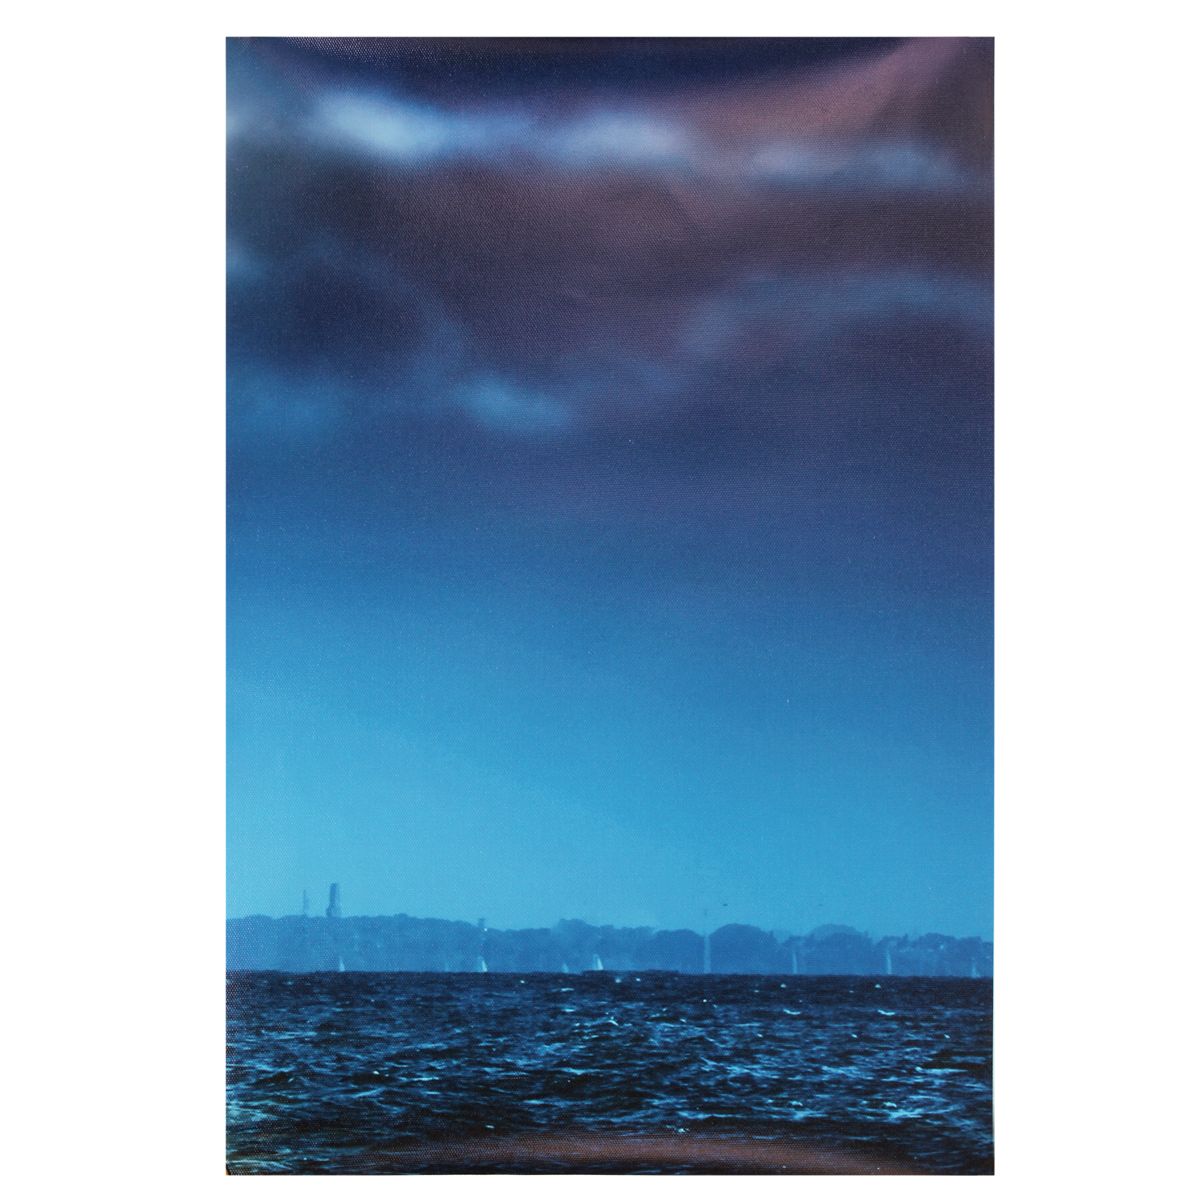 Modern-Canvas-Print-Painting-Picture-Home-Decor-Blue-Sea-Boat-Wall-Art-Framed-Paper-1165835